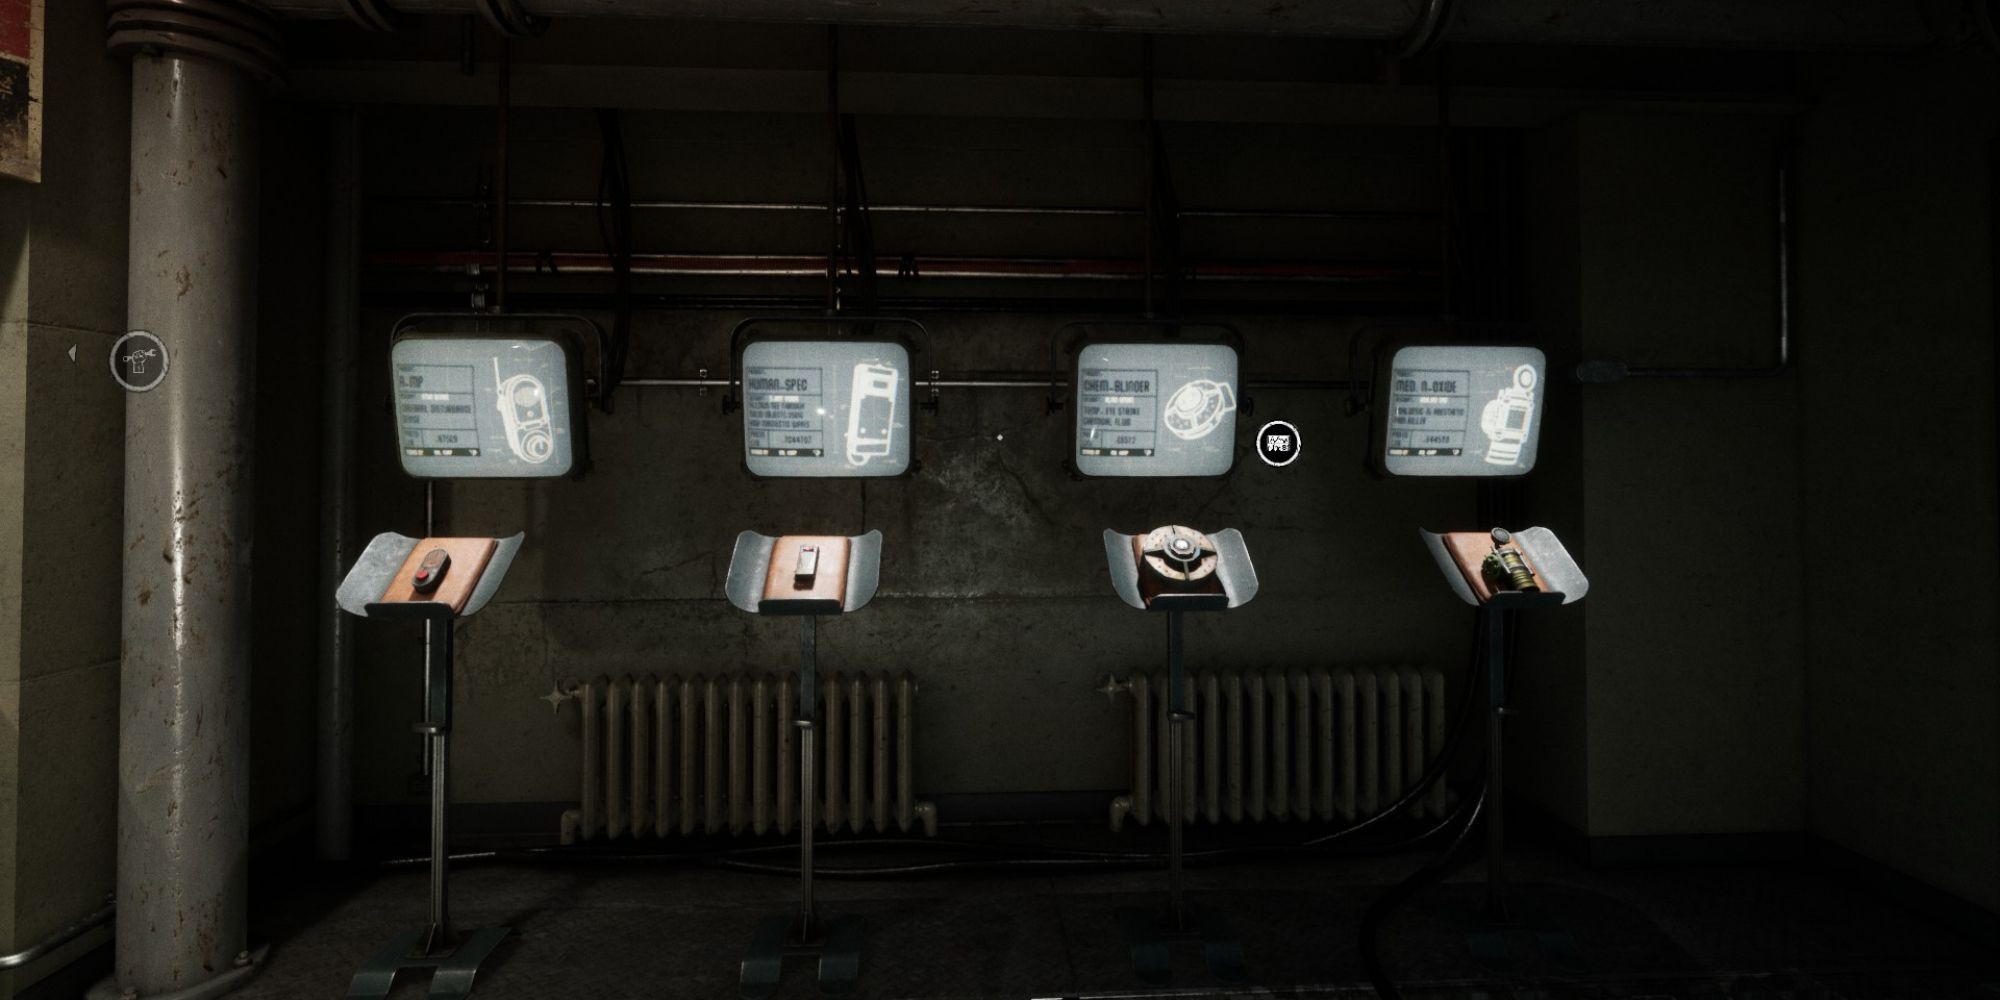 outlast trials rigs tutorial four television screens next to each other 